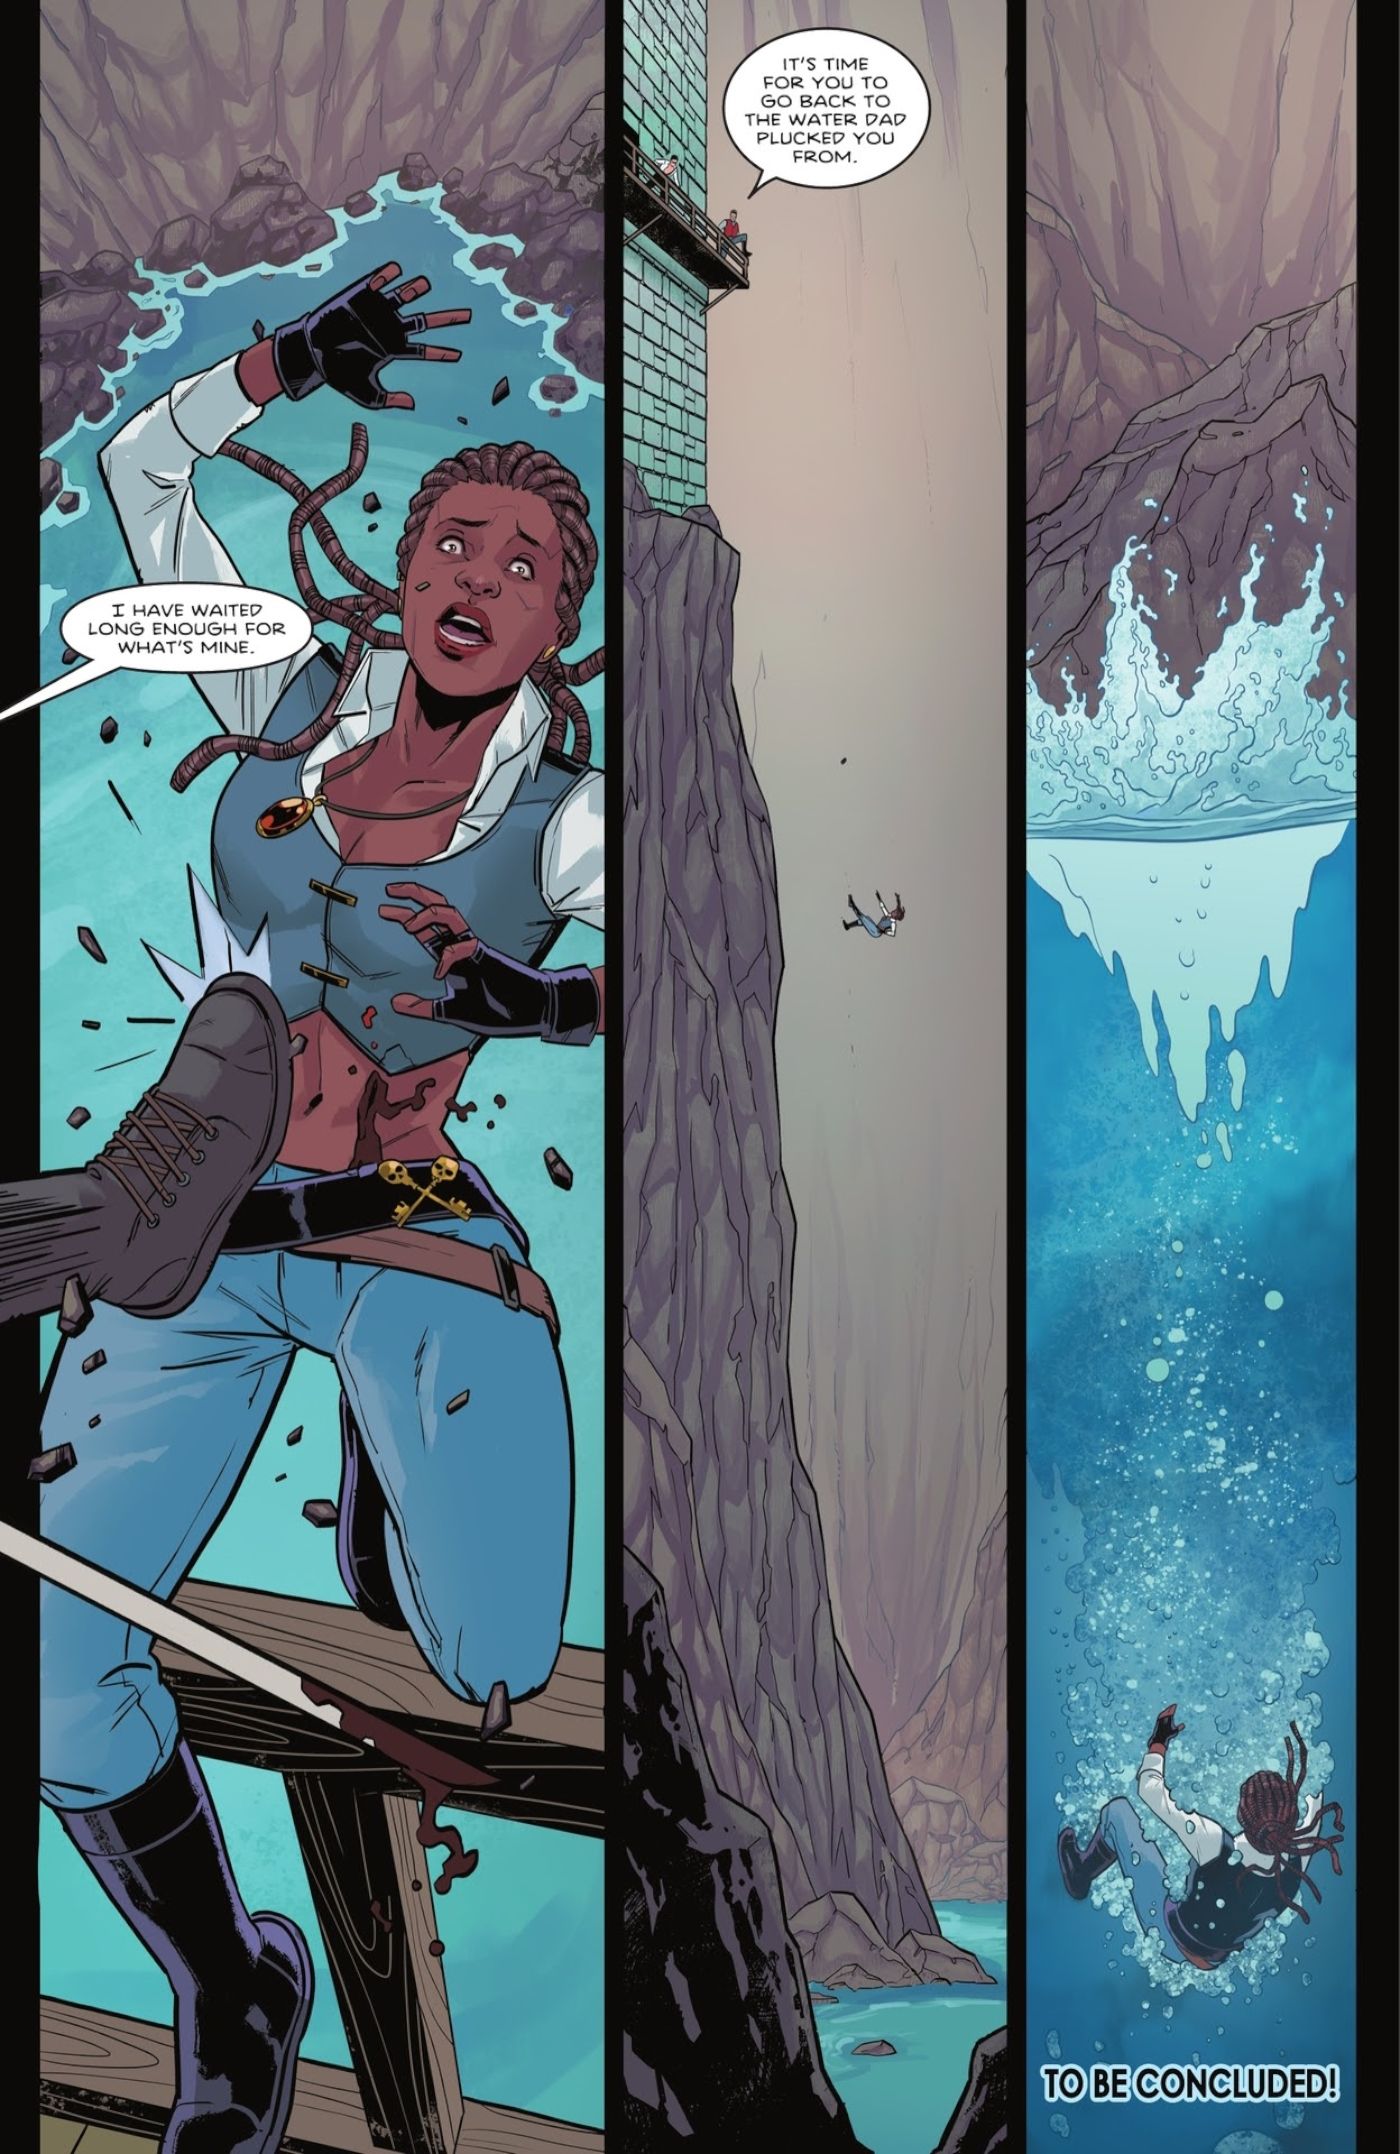 Comic book panels: A black woman dressed as a pirate is kicked into the ocean while bleeding from her stomach.